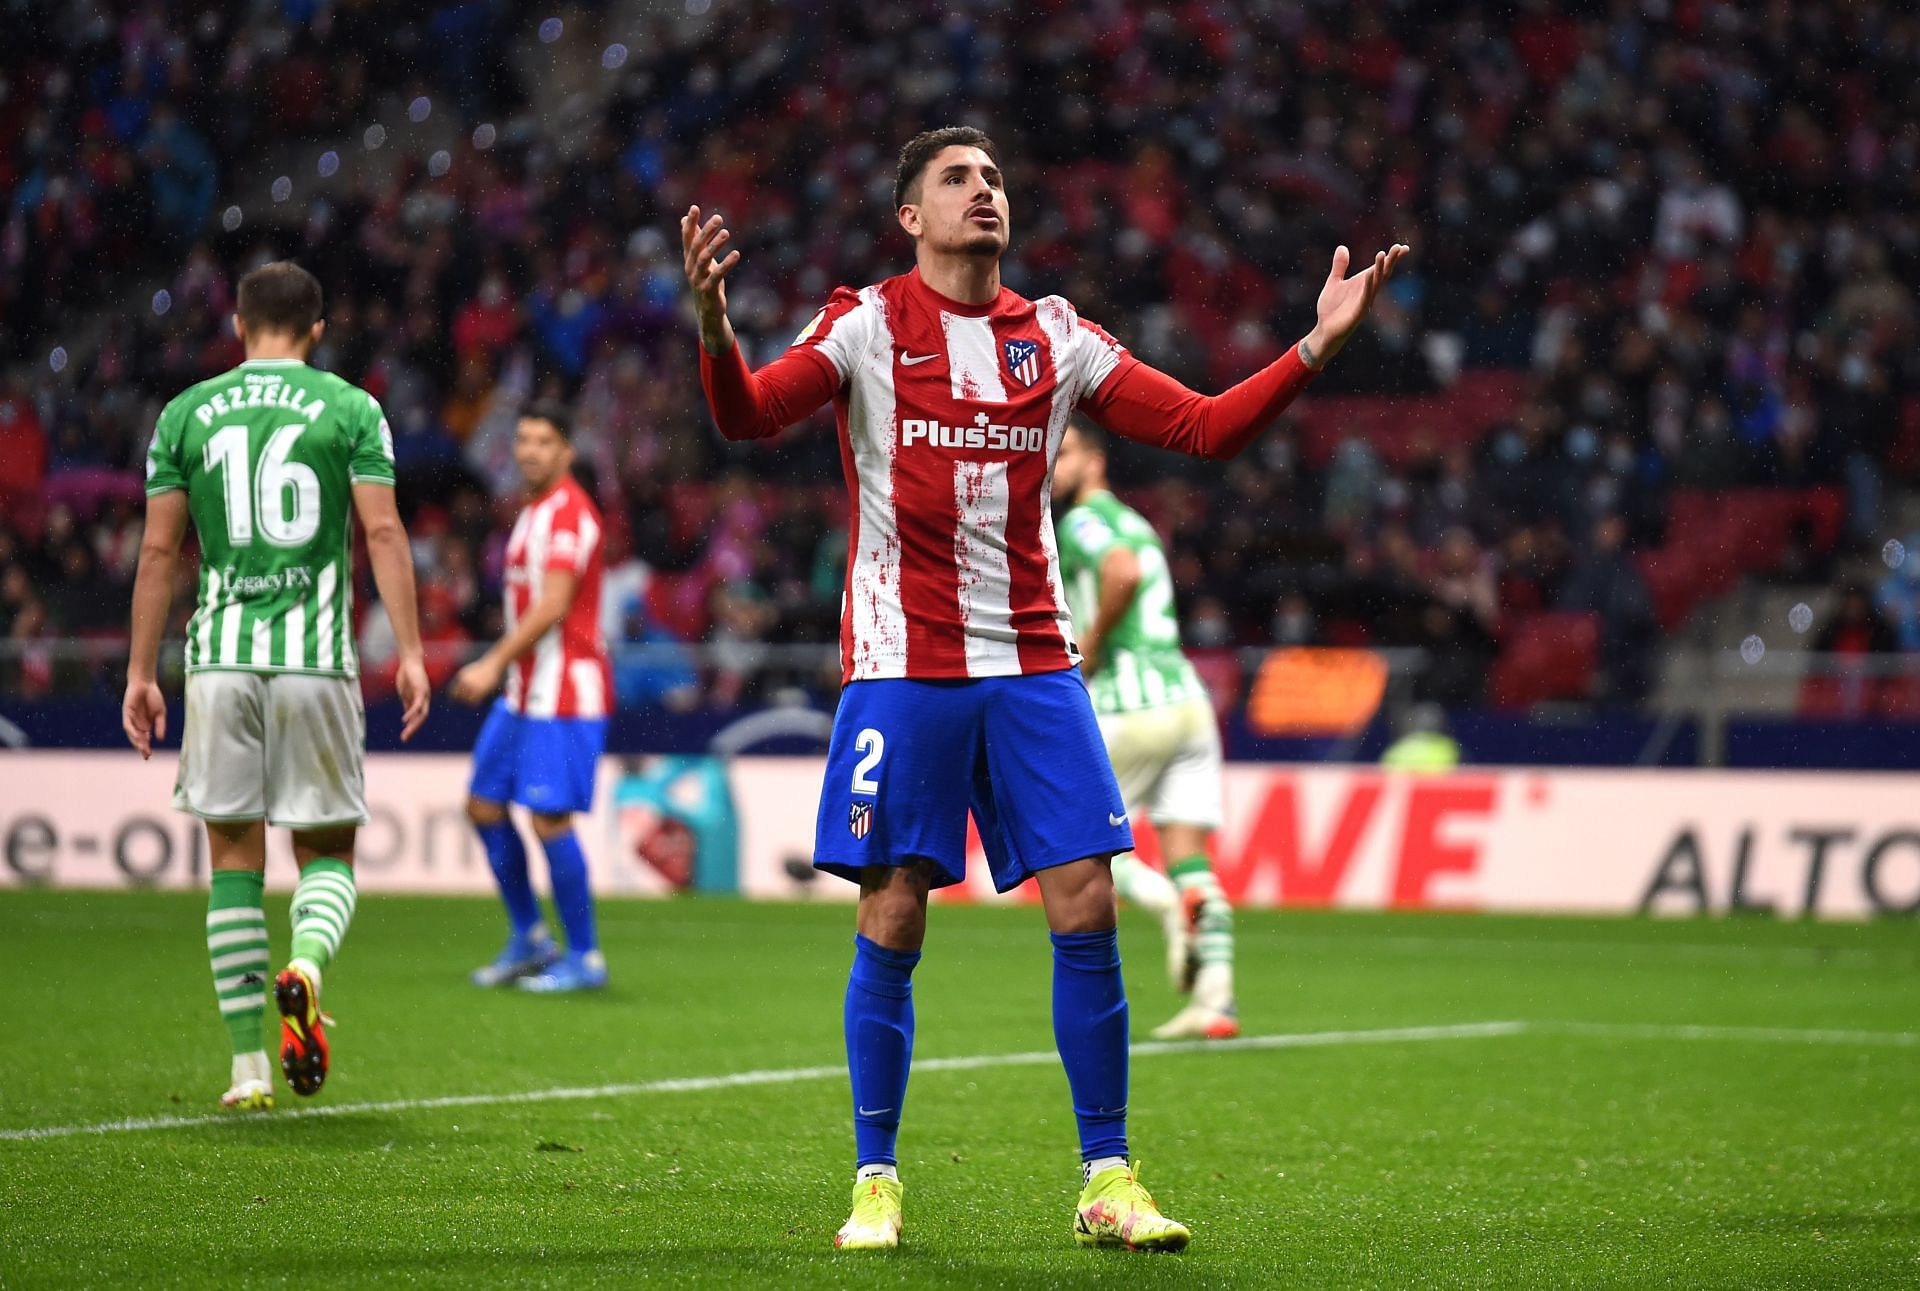 Jose Gimenez has been a consistent performer for the Rojiblancos.